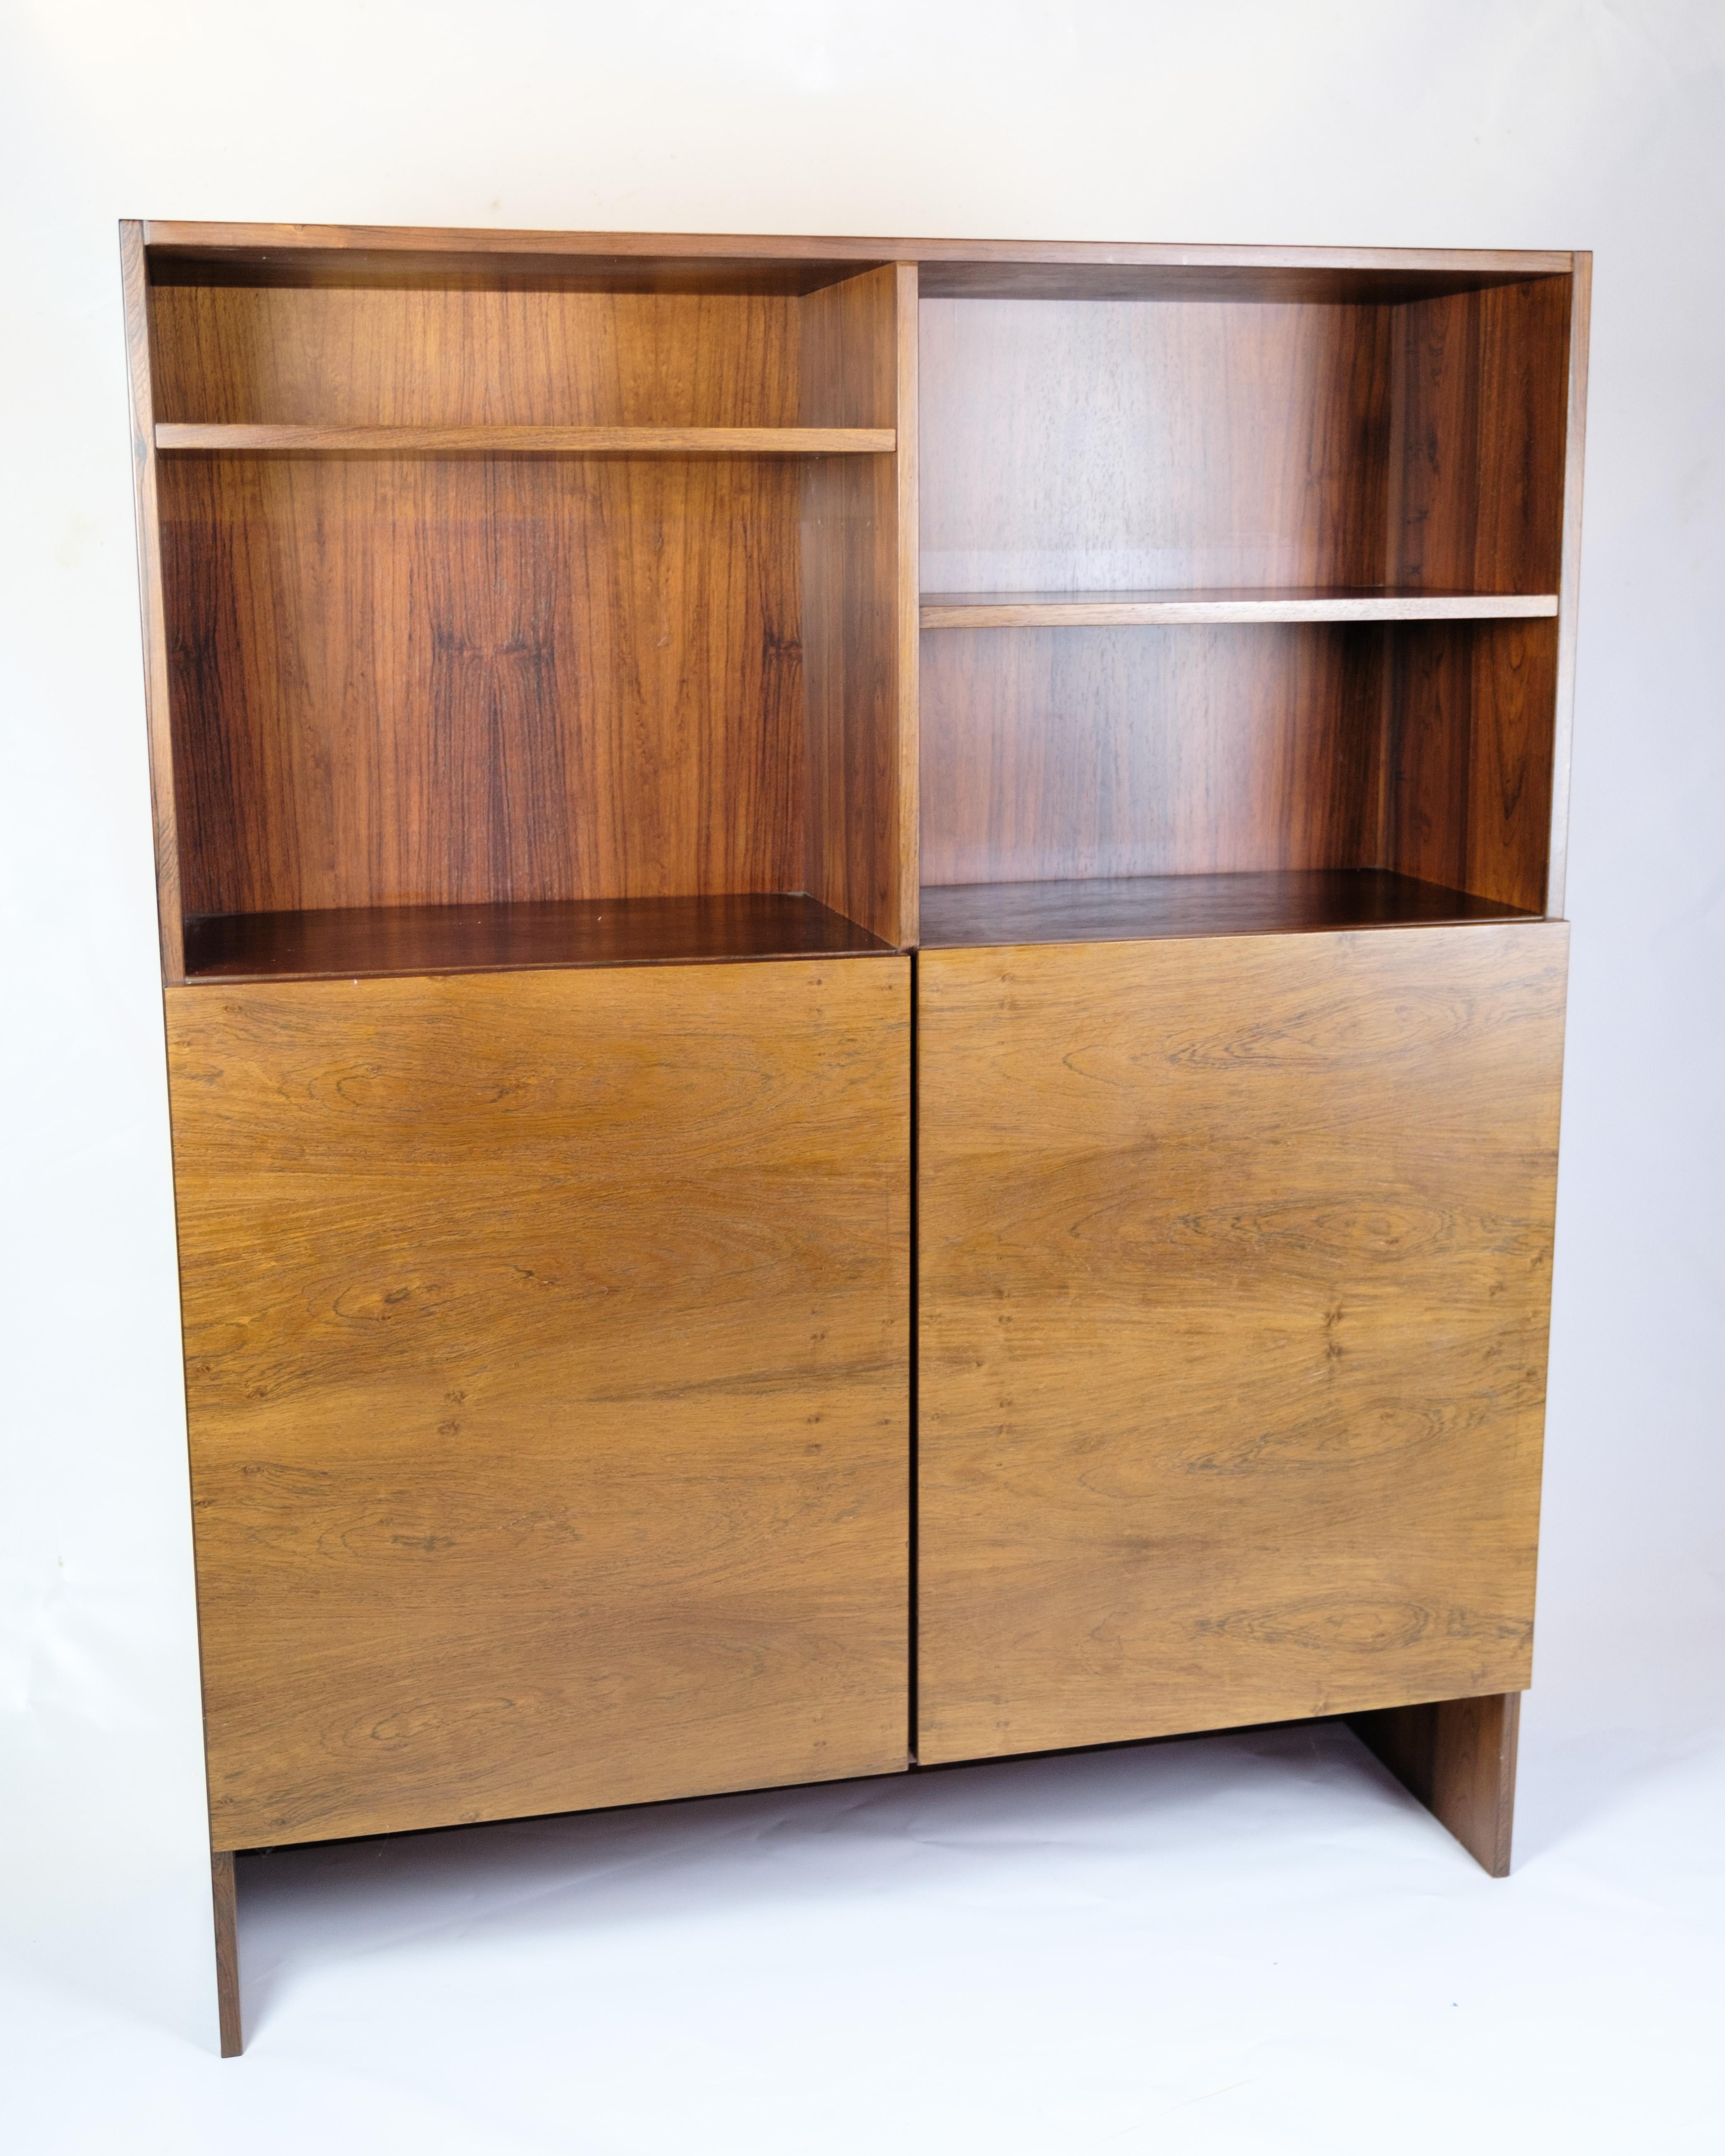 This bookcase is a fantastic example of Danish design from the 1960s. Made of rosewood, it exudes a timeless elegance and simplicity that characterizes the Scandinavian design tradition.

With its slim and functional design, this bookcase fits